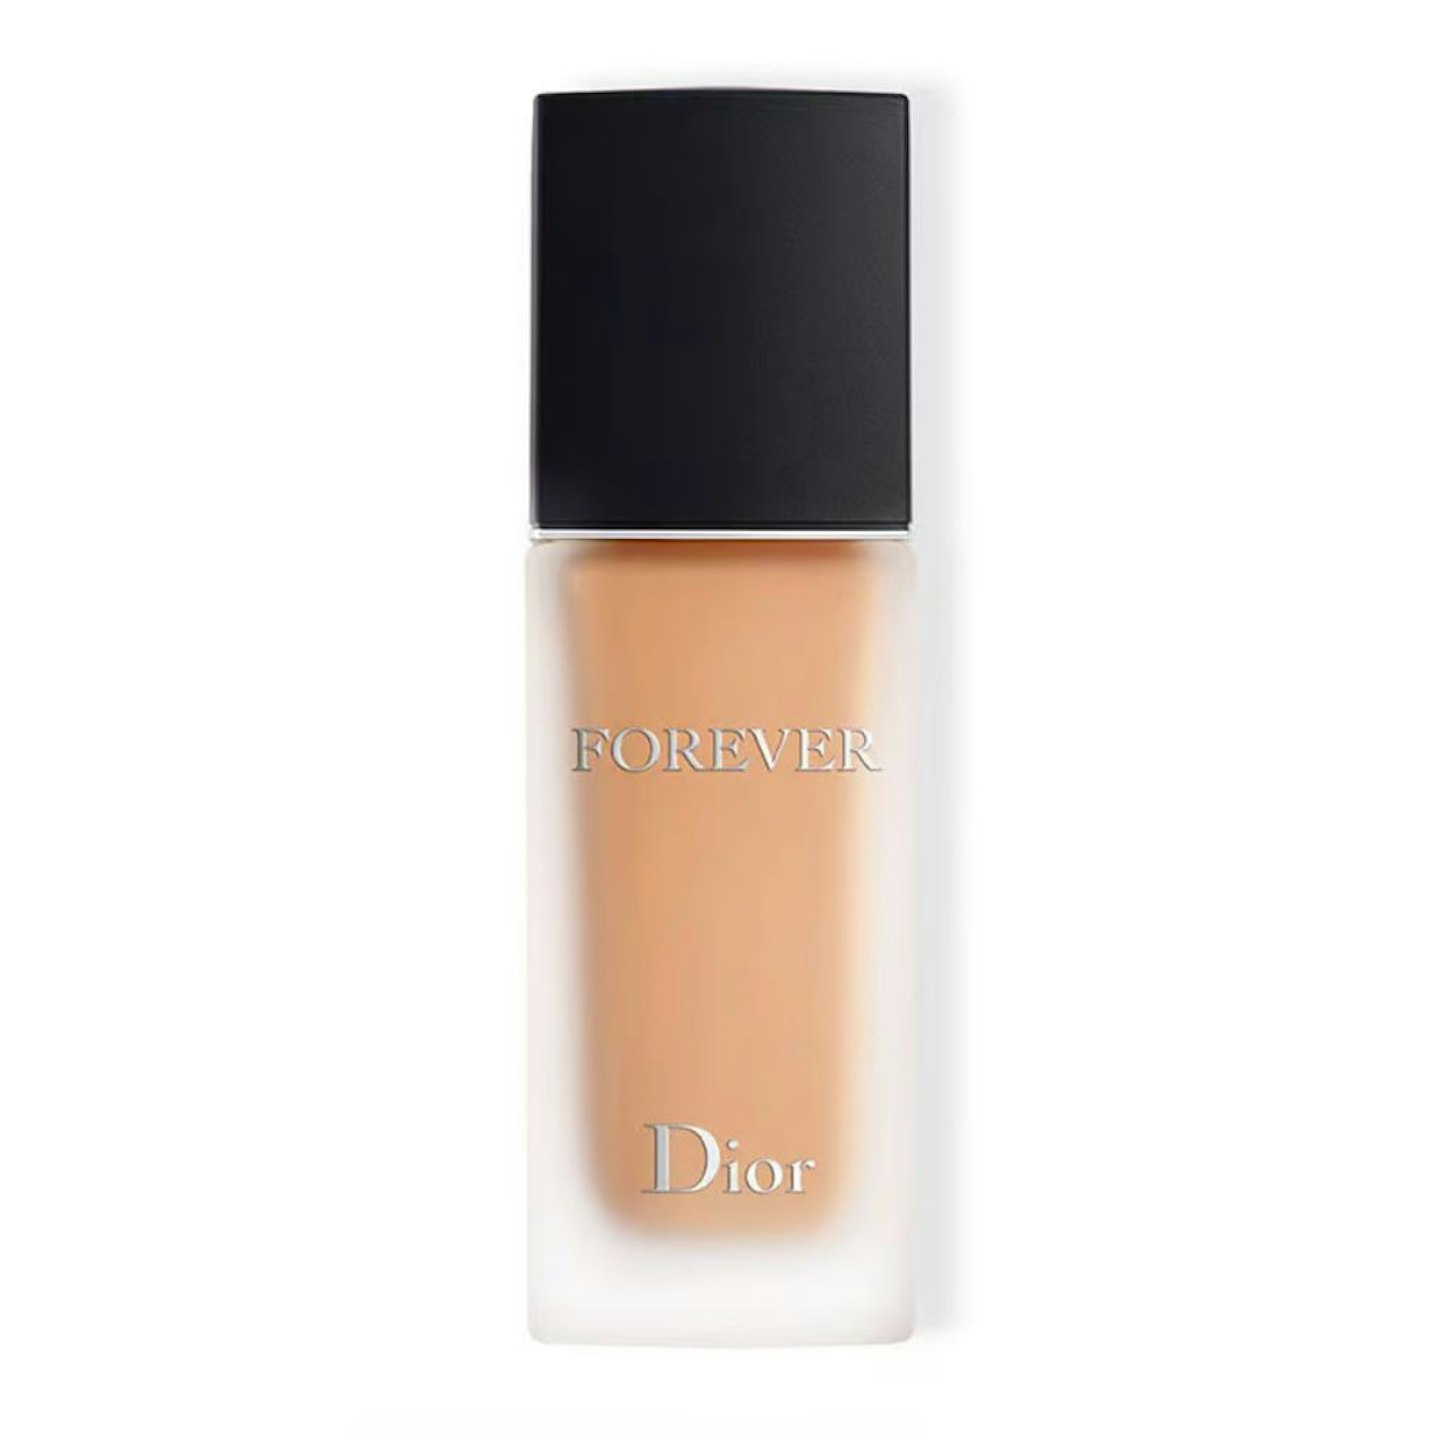 DIOR Forever Matte Foundation 30ml in 3N